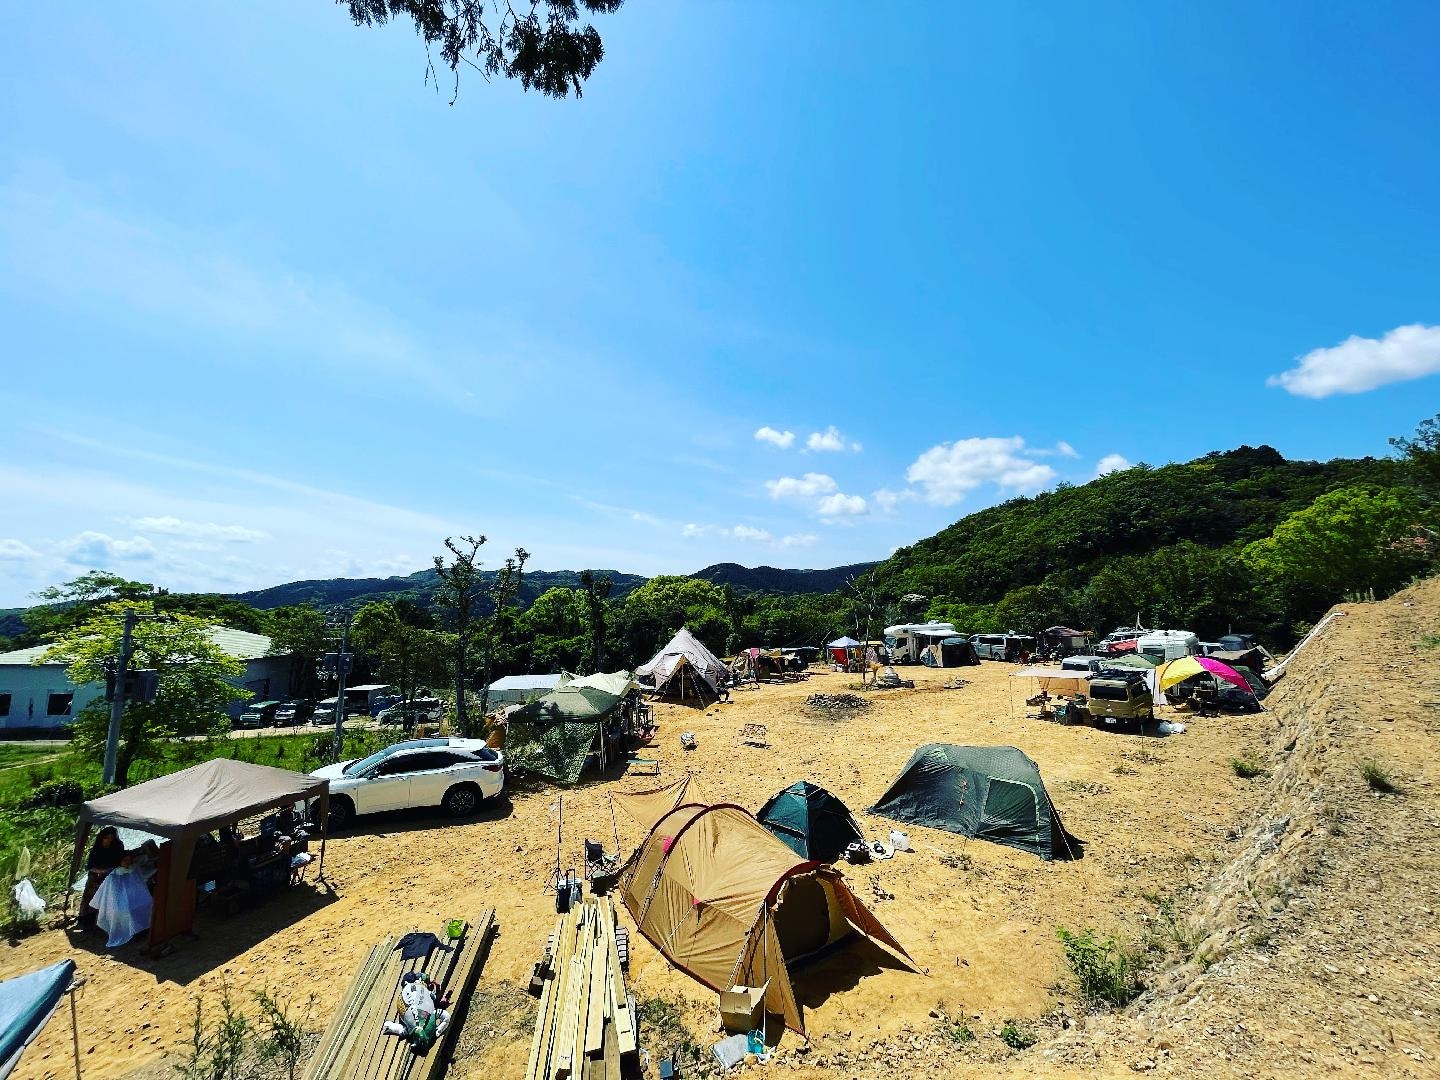 ・[Auto Camping] Enjoy camping under the big blue sky. You can see a star-filled sky at night.